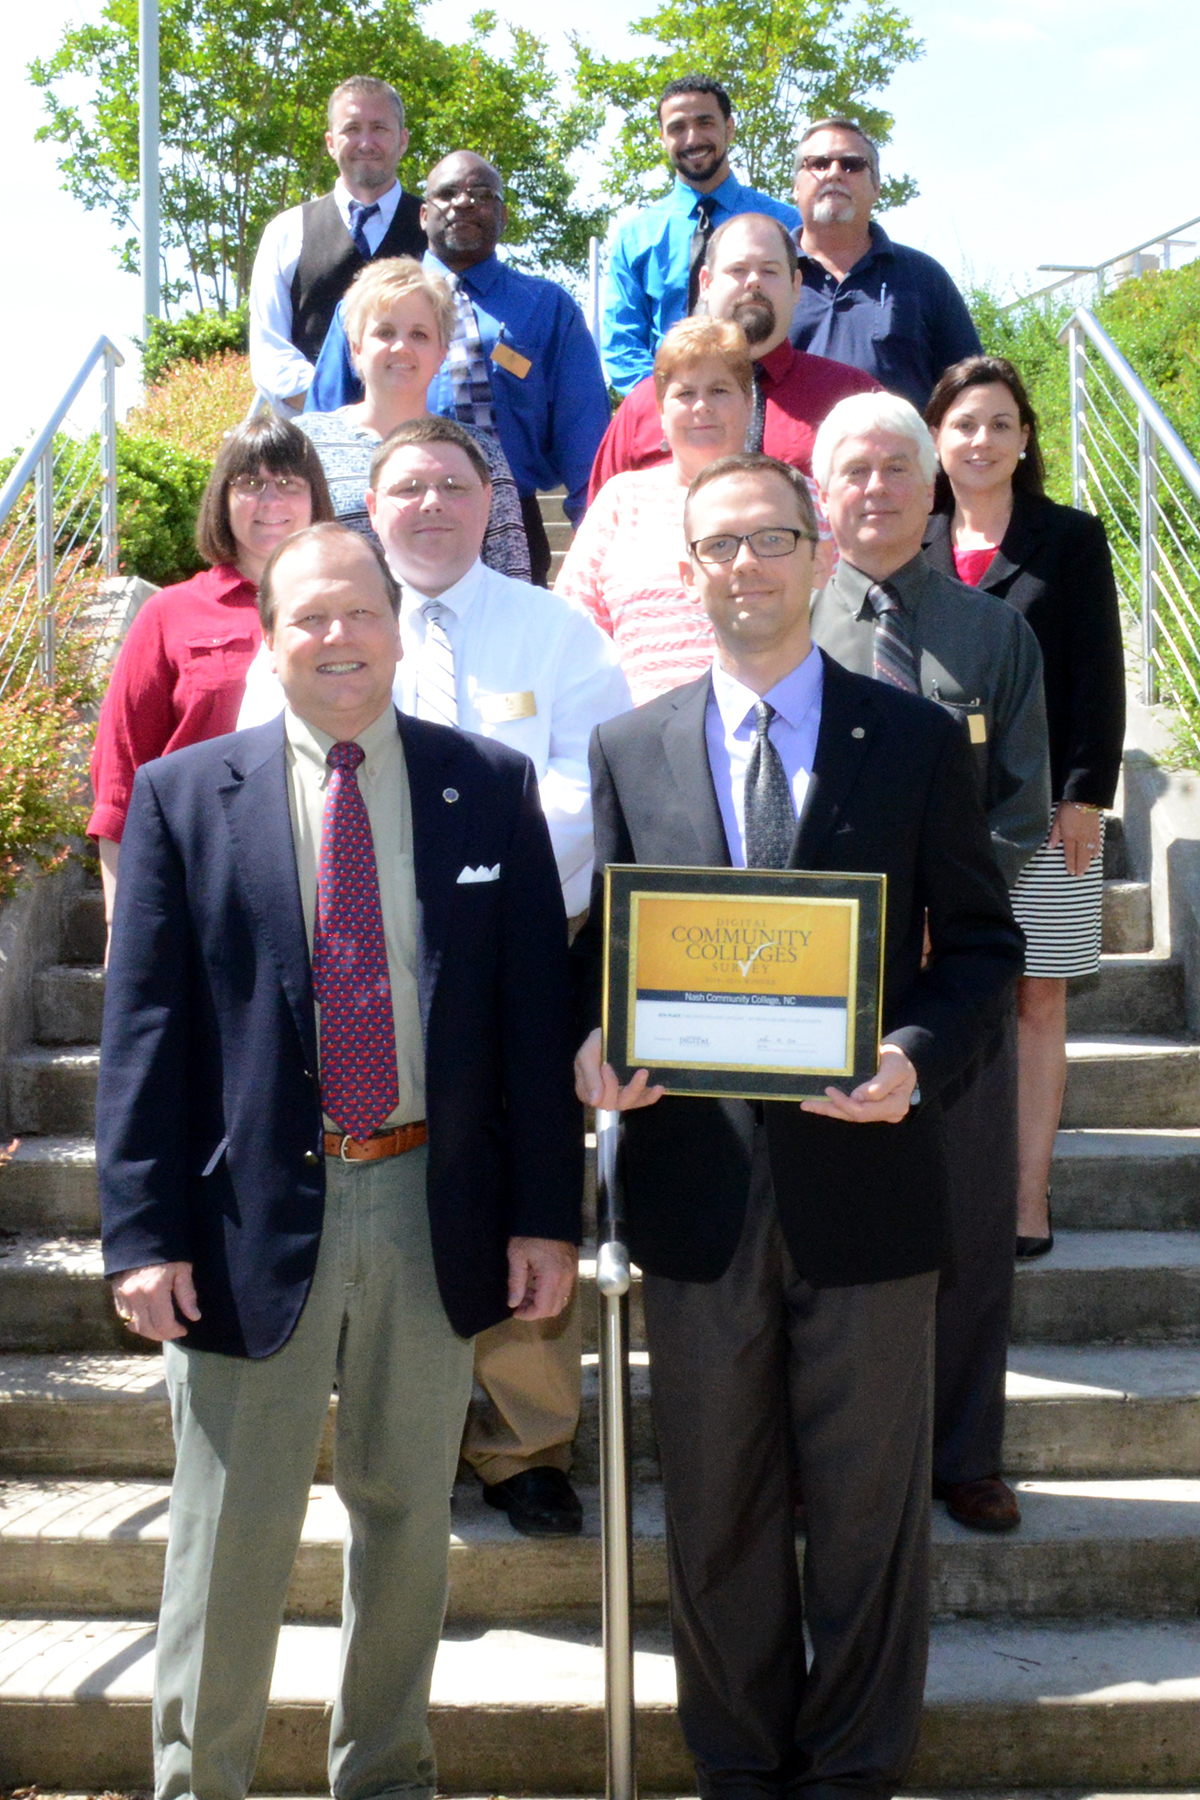 Pictured from left, NCC President Dr. Bill Carver and Chief Information Officer Jonathan Vester, with Institutional Technology and Marketing staff. The teams recently earned 8th place in the U.S. for the college's digital presence among colleges of the same size.